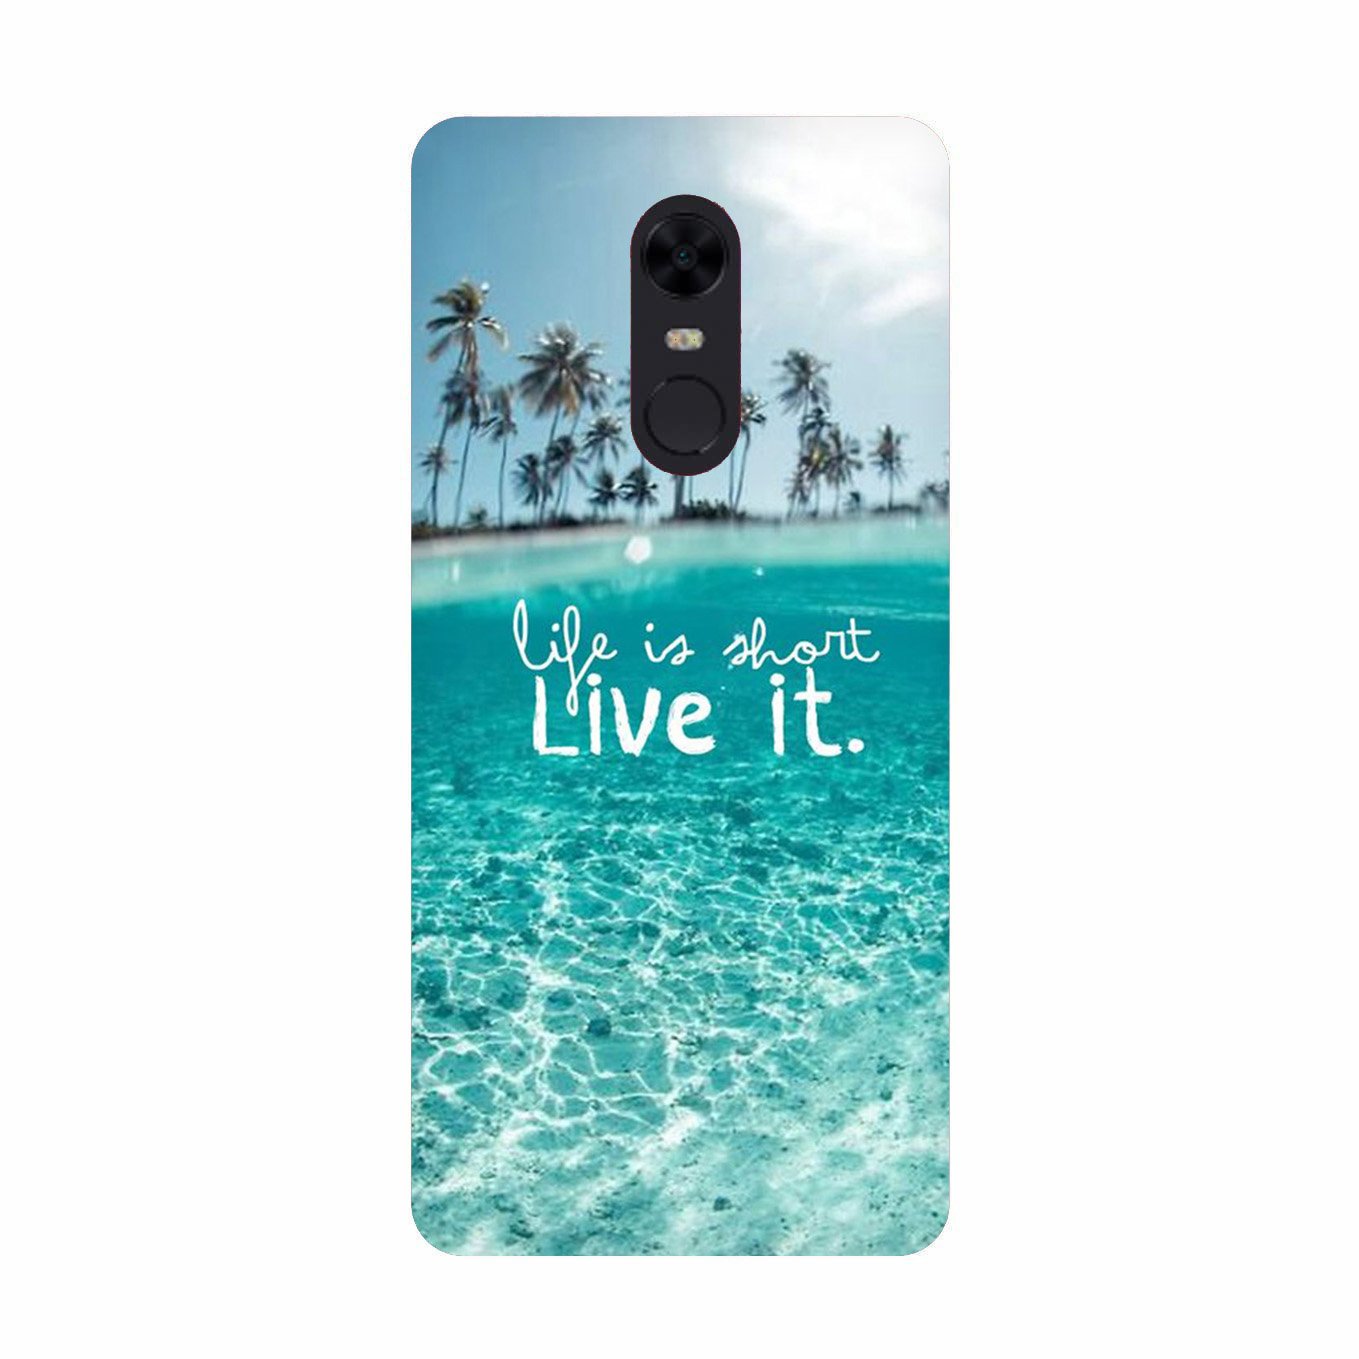 Life is short live it Case for Redmi Note 5